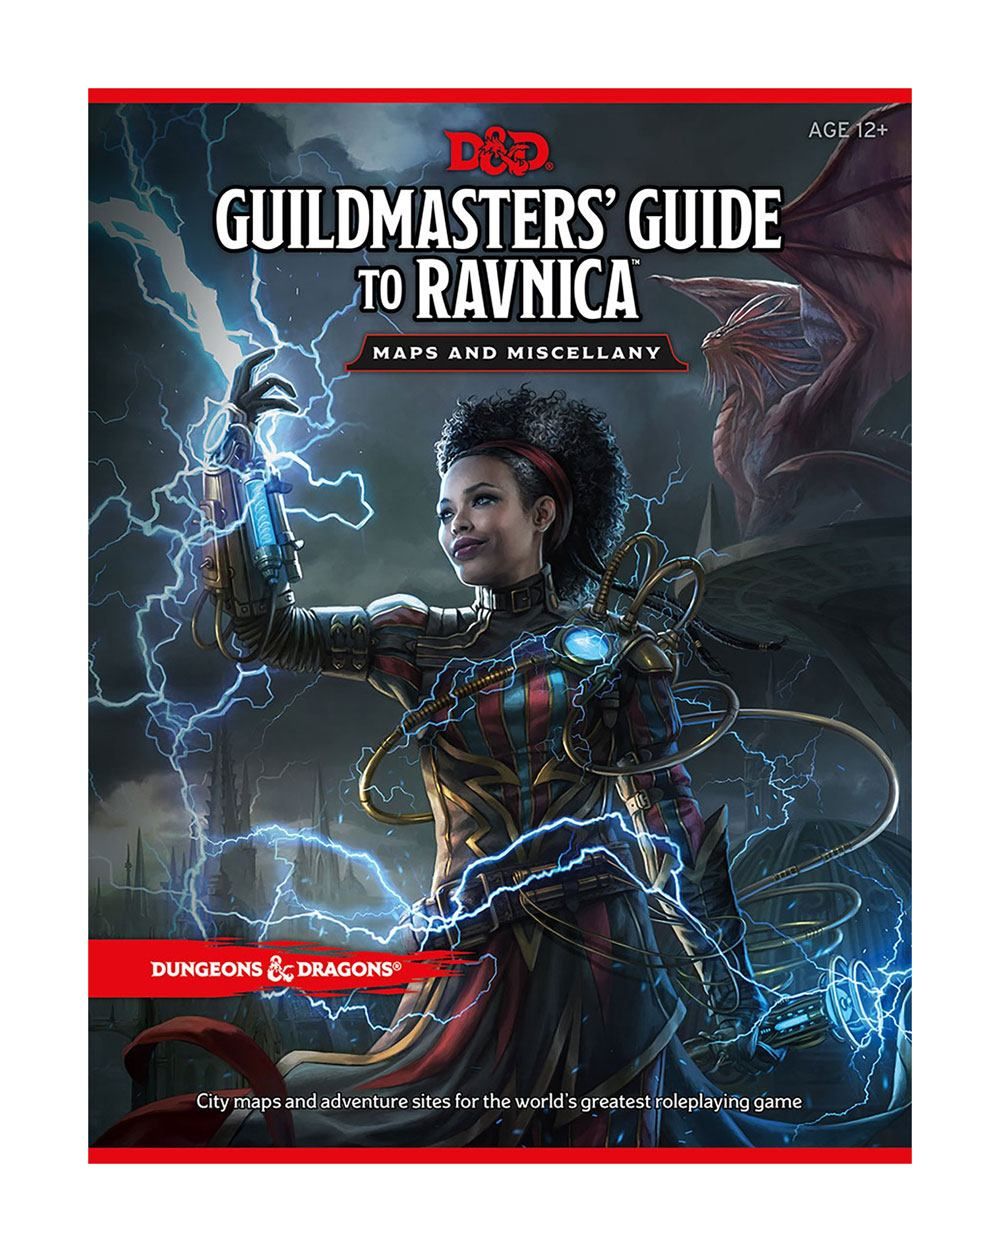 Dungeons & Dragons RPG Guildmasters' Guide to Ravnica - Maps & Miscellany Anglická Wizards of the Coast